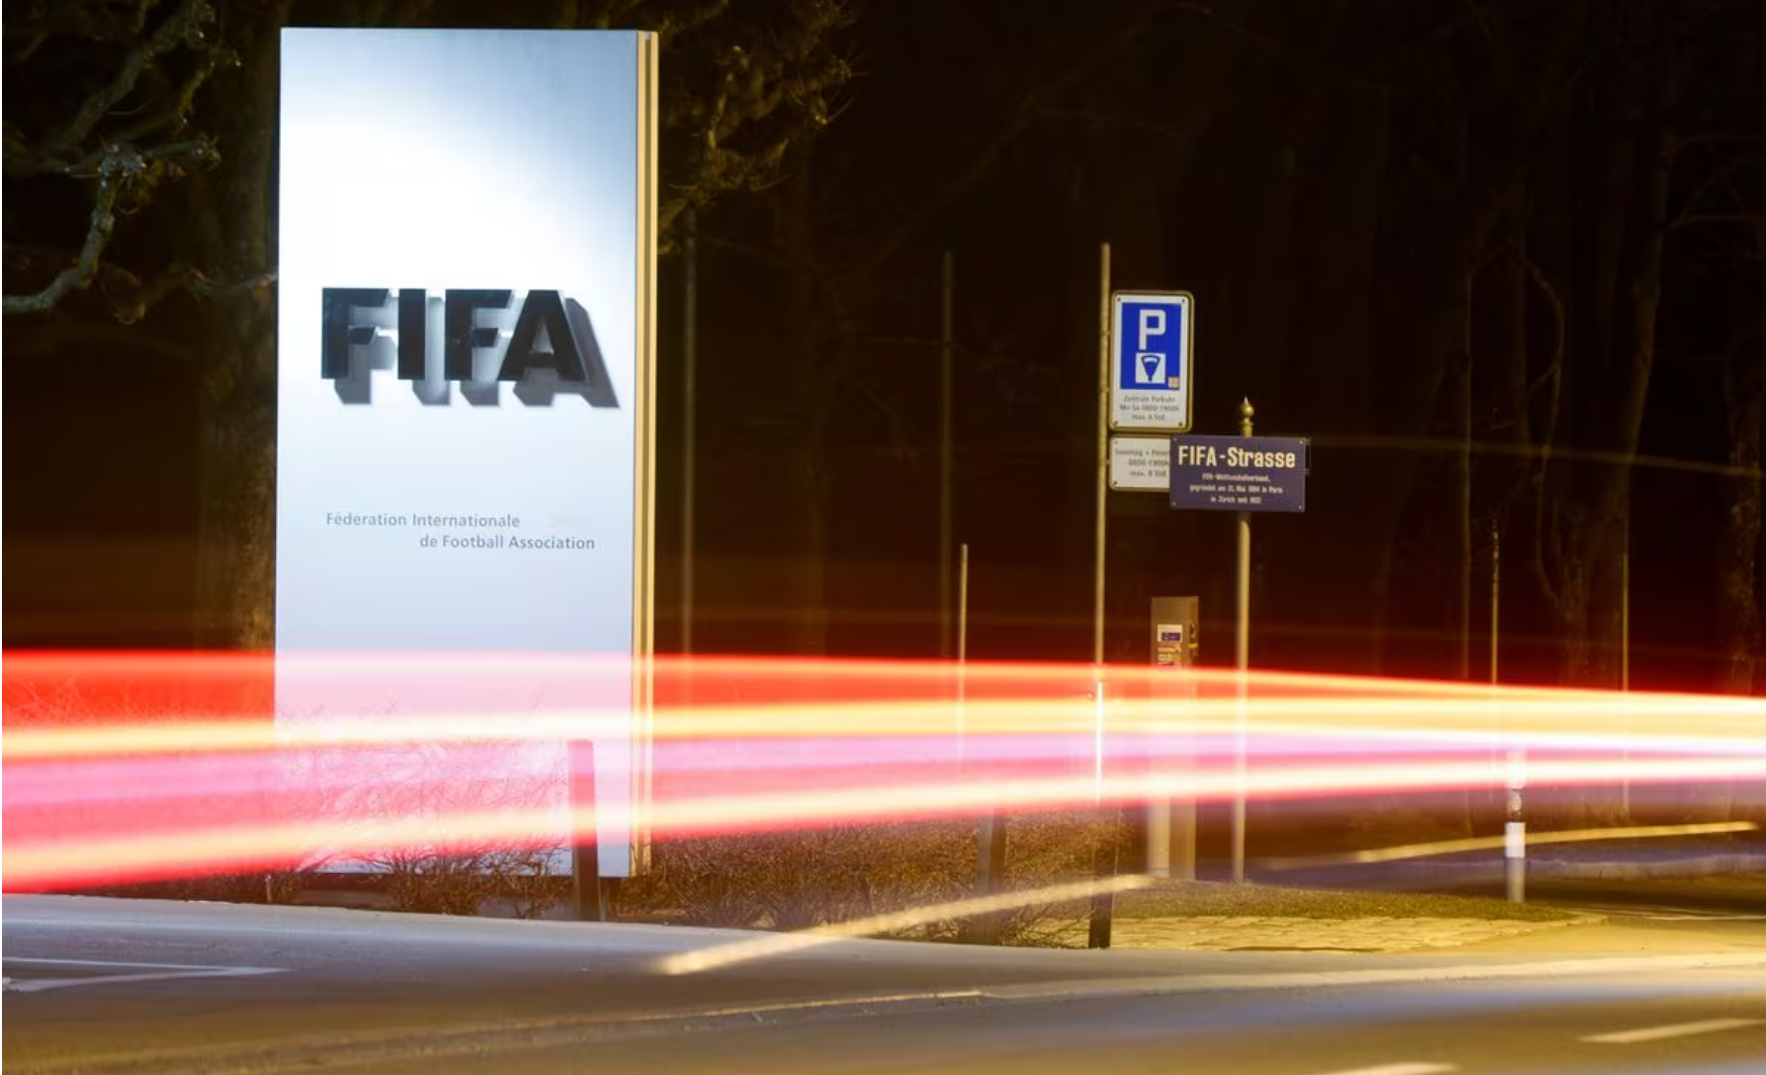 European Football Leagues and Player Unions to File Formal Complaint Against FIFA Over Congested Schedules